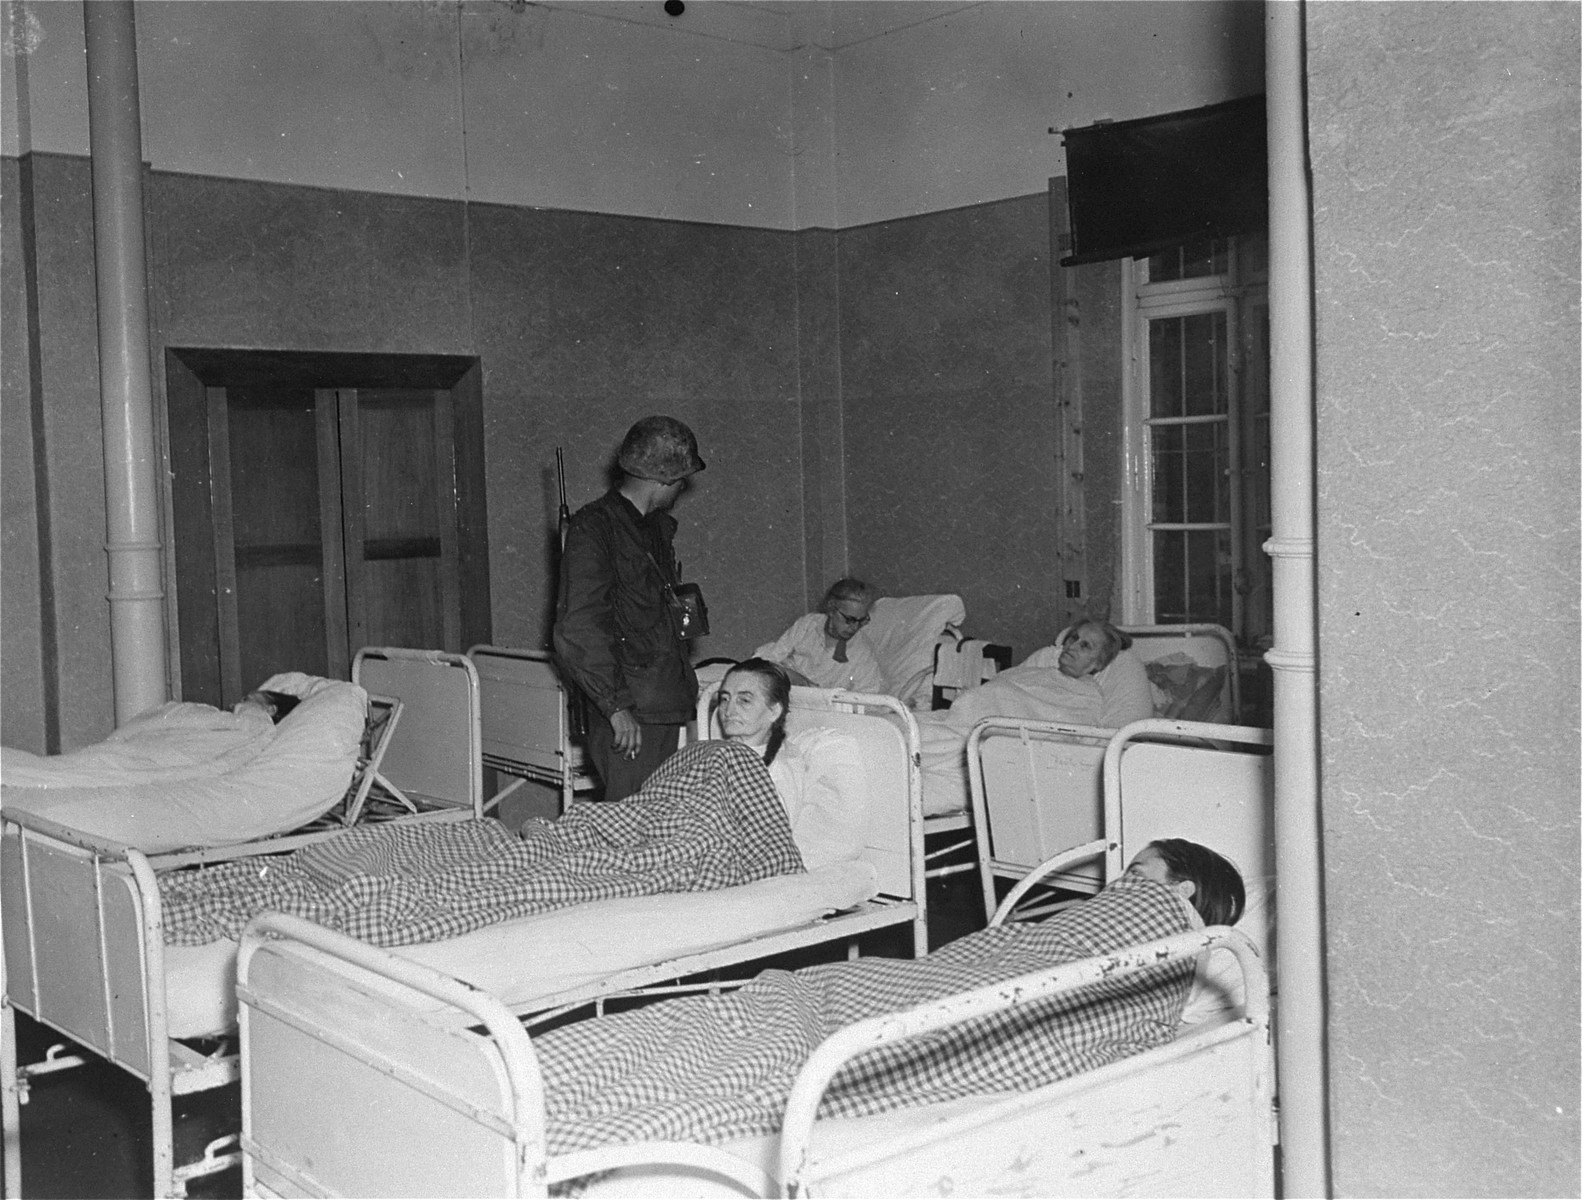 Lt. Alexander J. Wedderburn, photographer with the 28th Infantry Division, First US.Army, questions elderly survivors who are lying in bed at the Hadamar Institute. 

The photograph was taken by an American military photographer soon after the liberation.